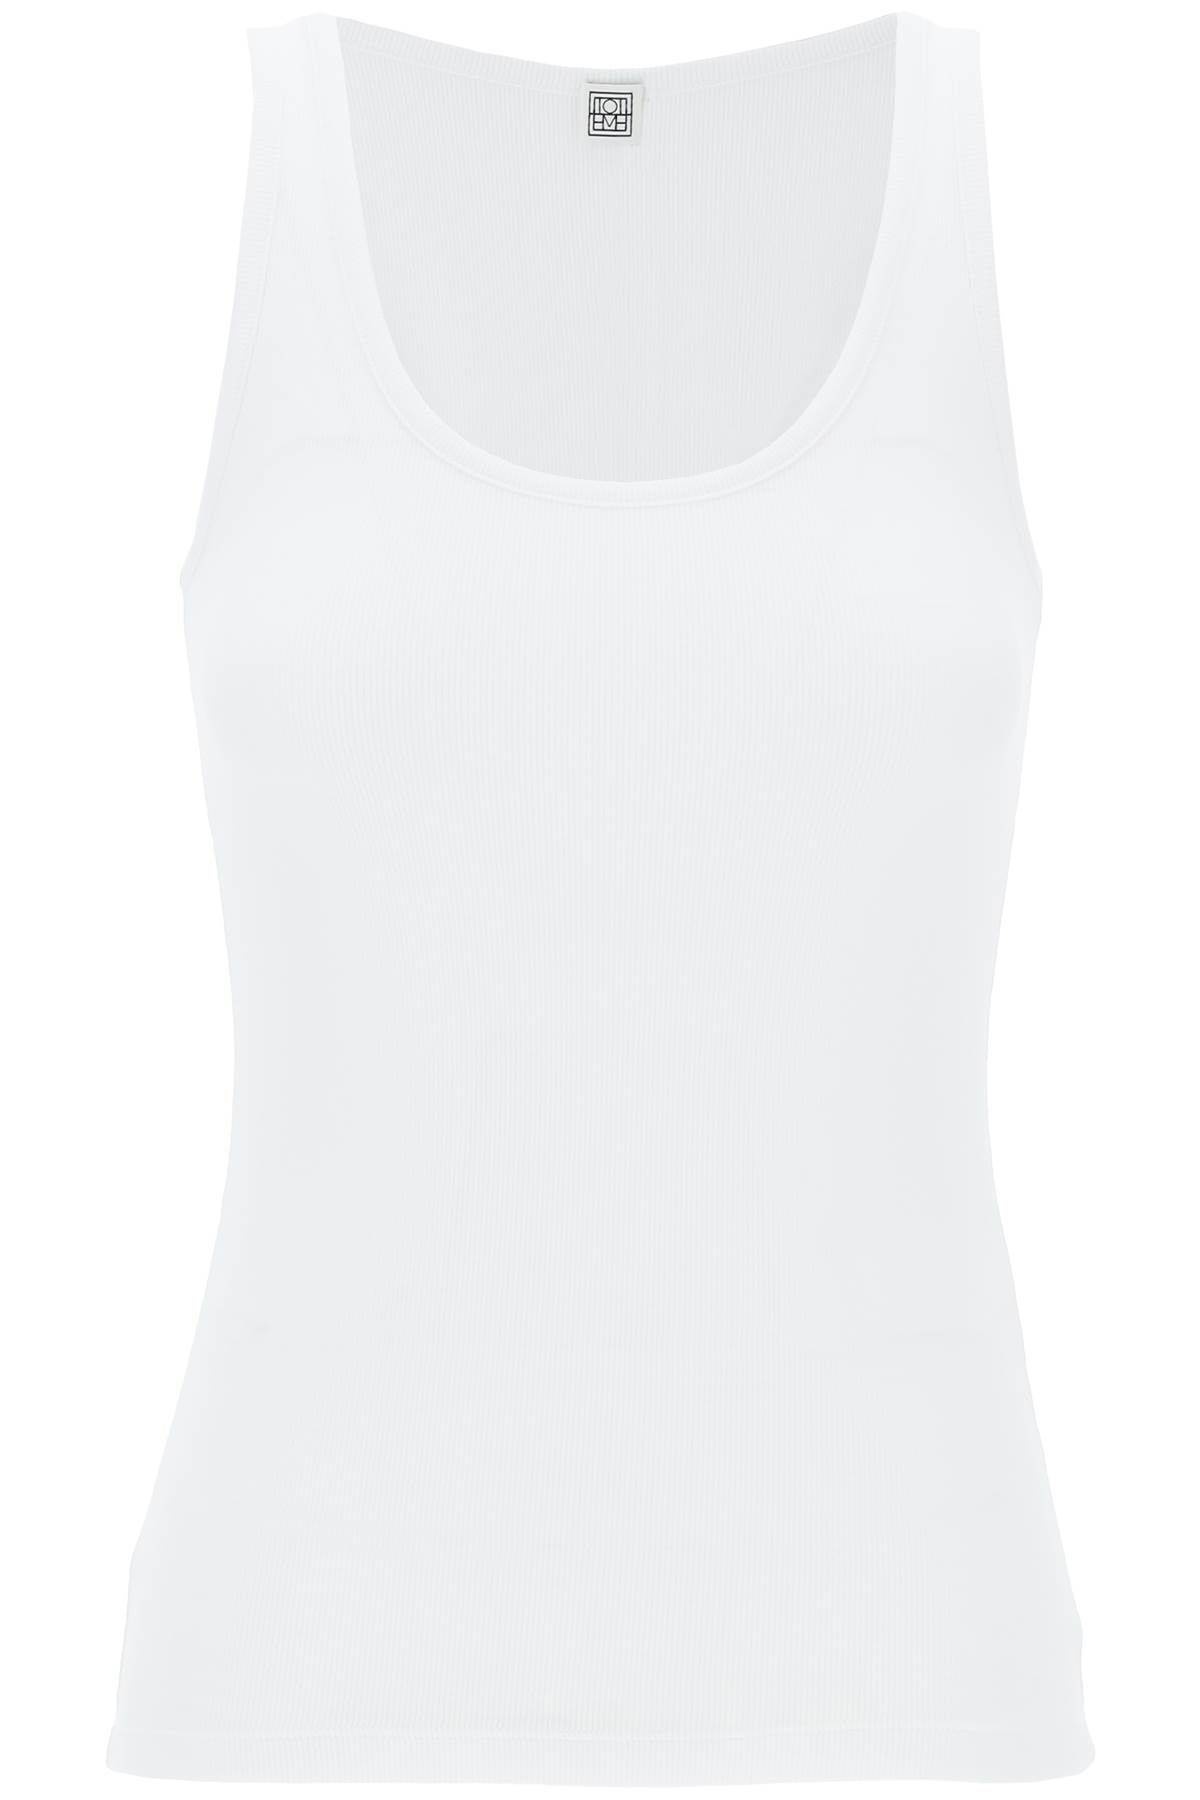 "RIBBED JERSEY TANK TOP WITH - 1